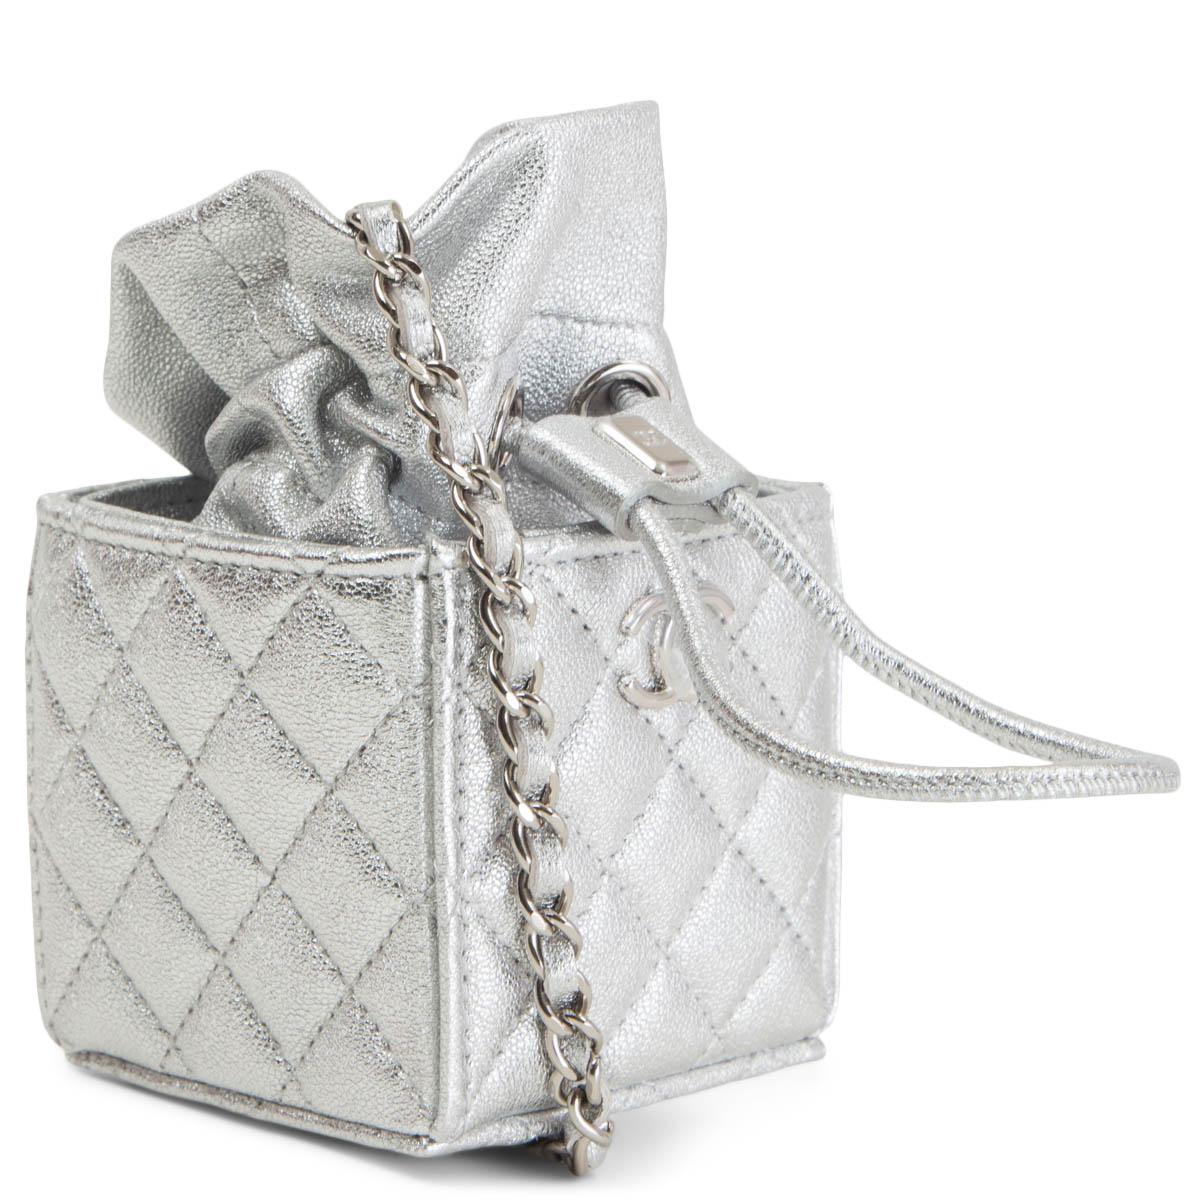 100% authentic Chanel mini coin crossbody bag in metallic silver leather featuring a silver-tone shoulder-strap and a 'CC' on the front. 2021 VIP gift. Opens with a 'CC' logo drawstring. Lined in silver. Has been worn once and is in virtually new